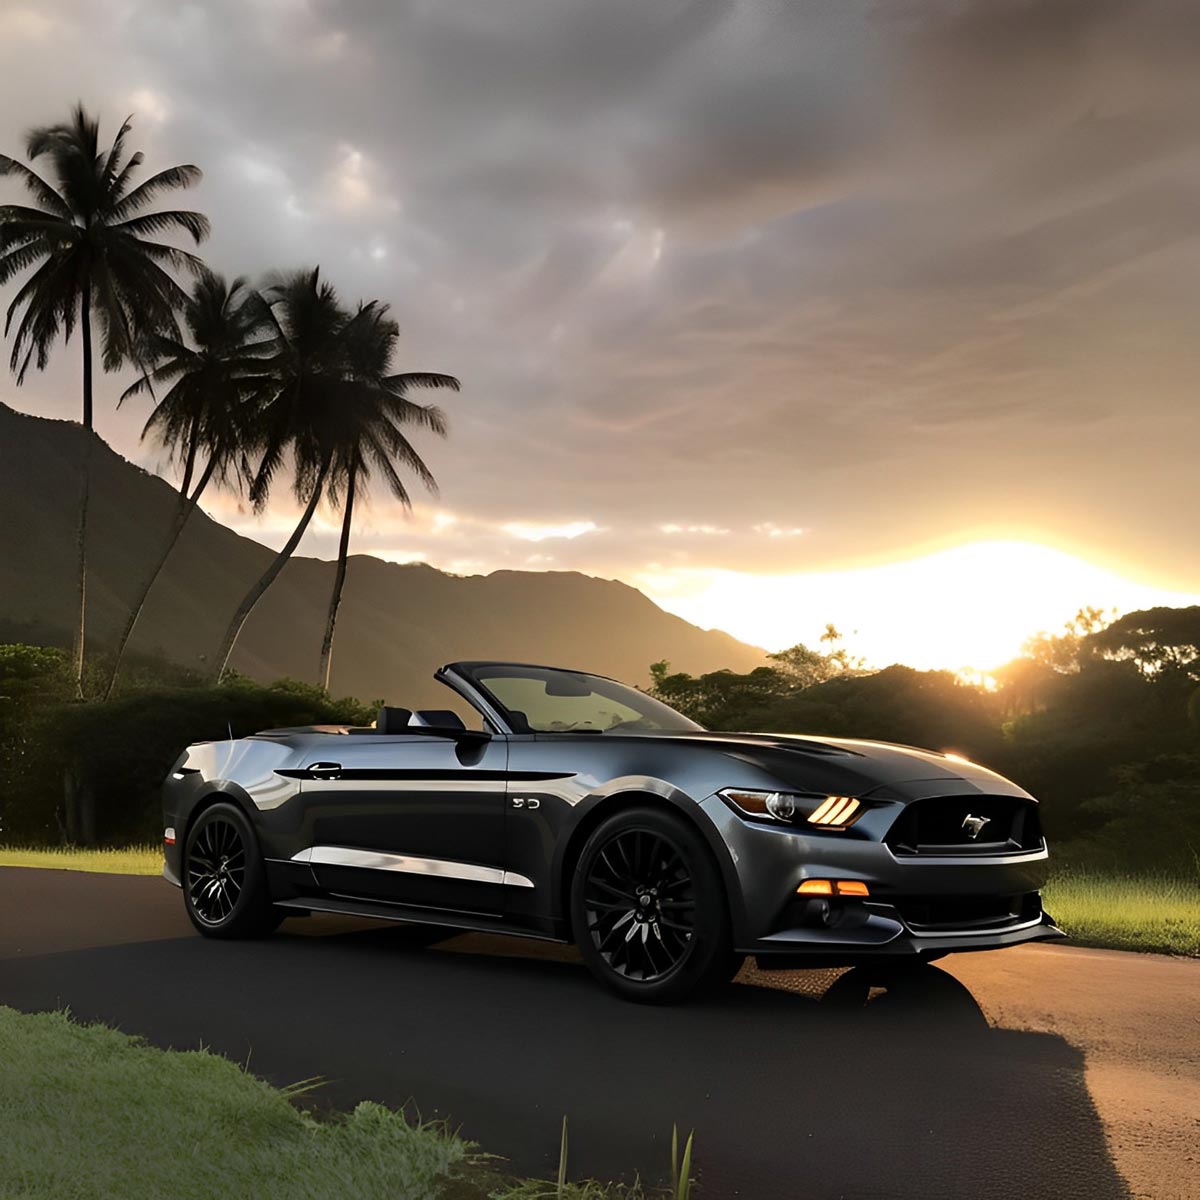 Convertible on a road in Maui